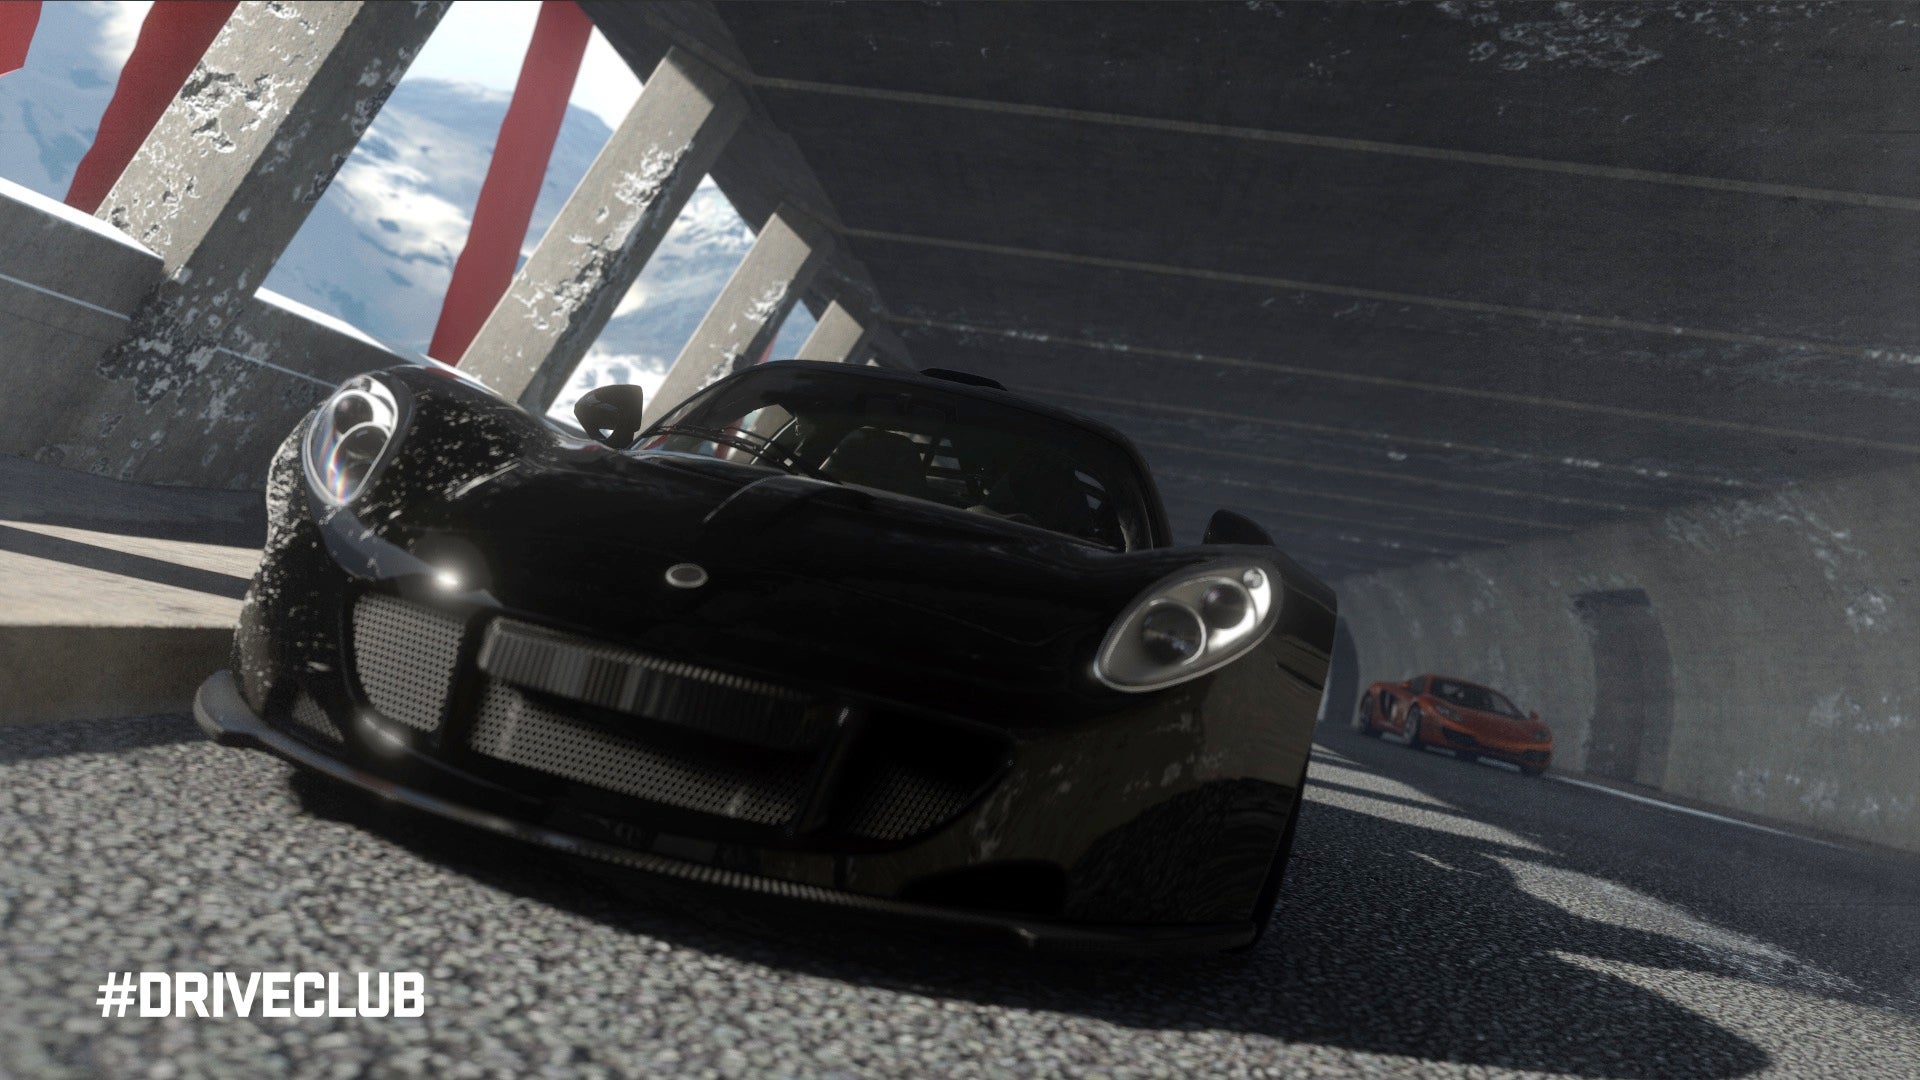 Image for DriveClub wasn't delayed to implement VR support, says Yoshida